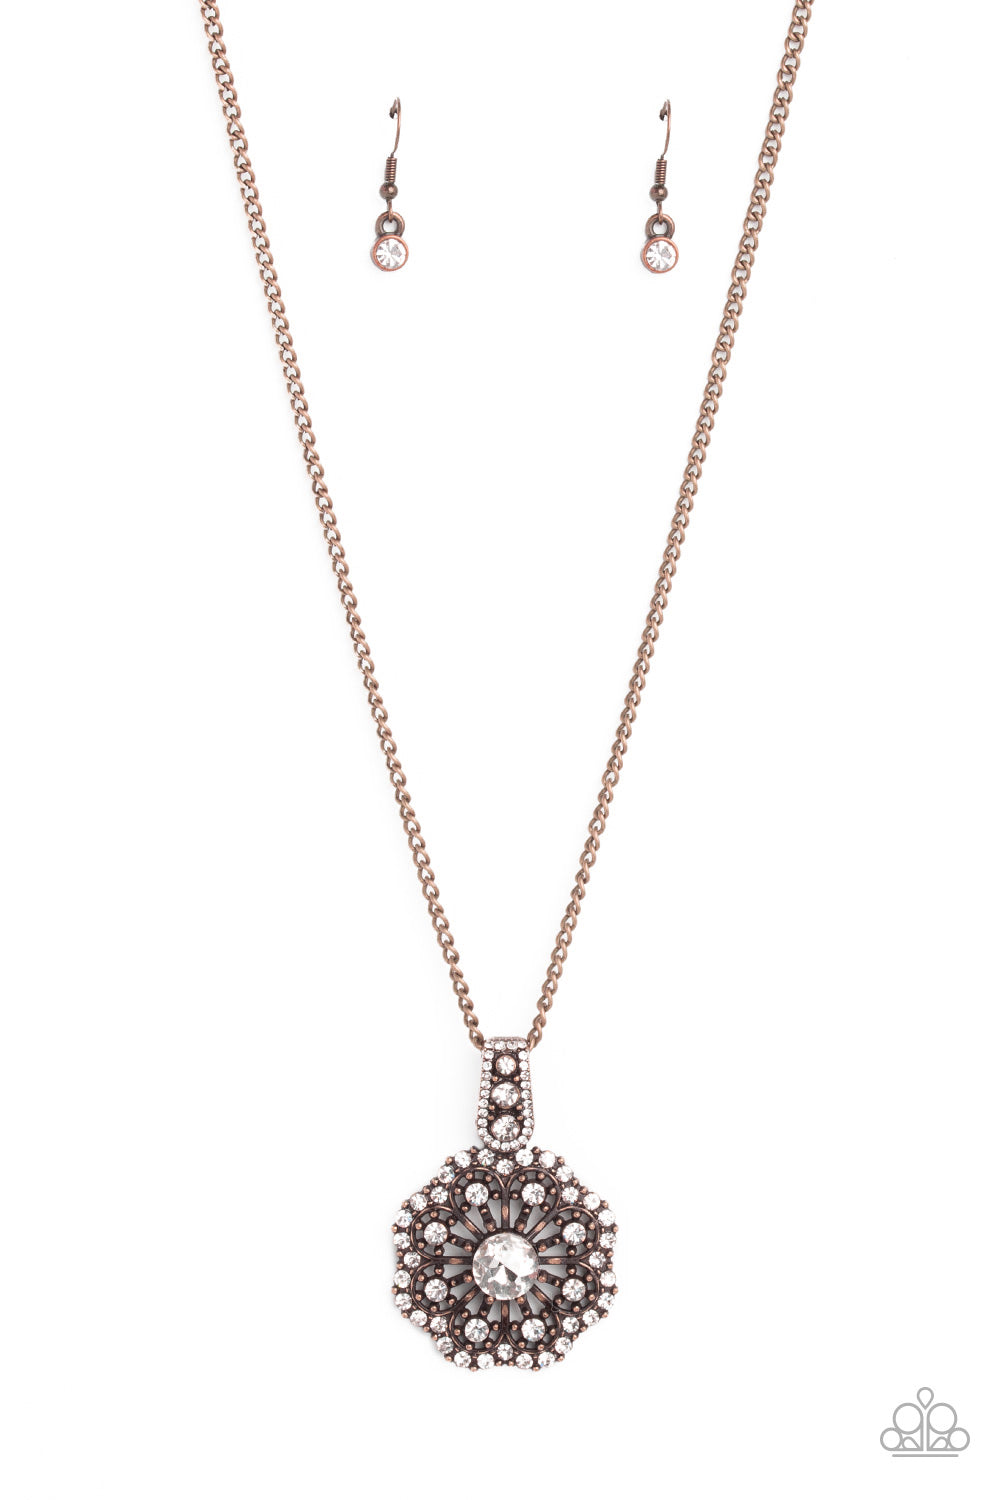 Bewitching Brilliance - copper - Paparazzi necklace